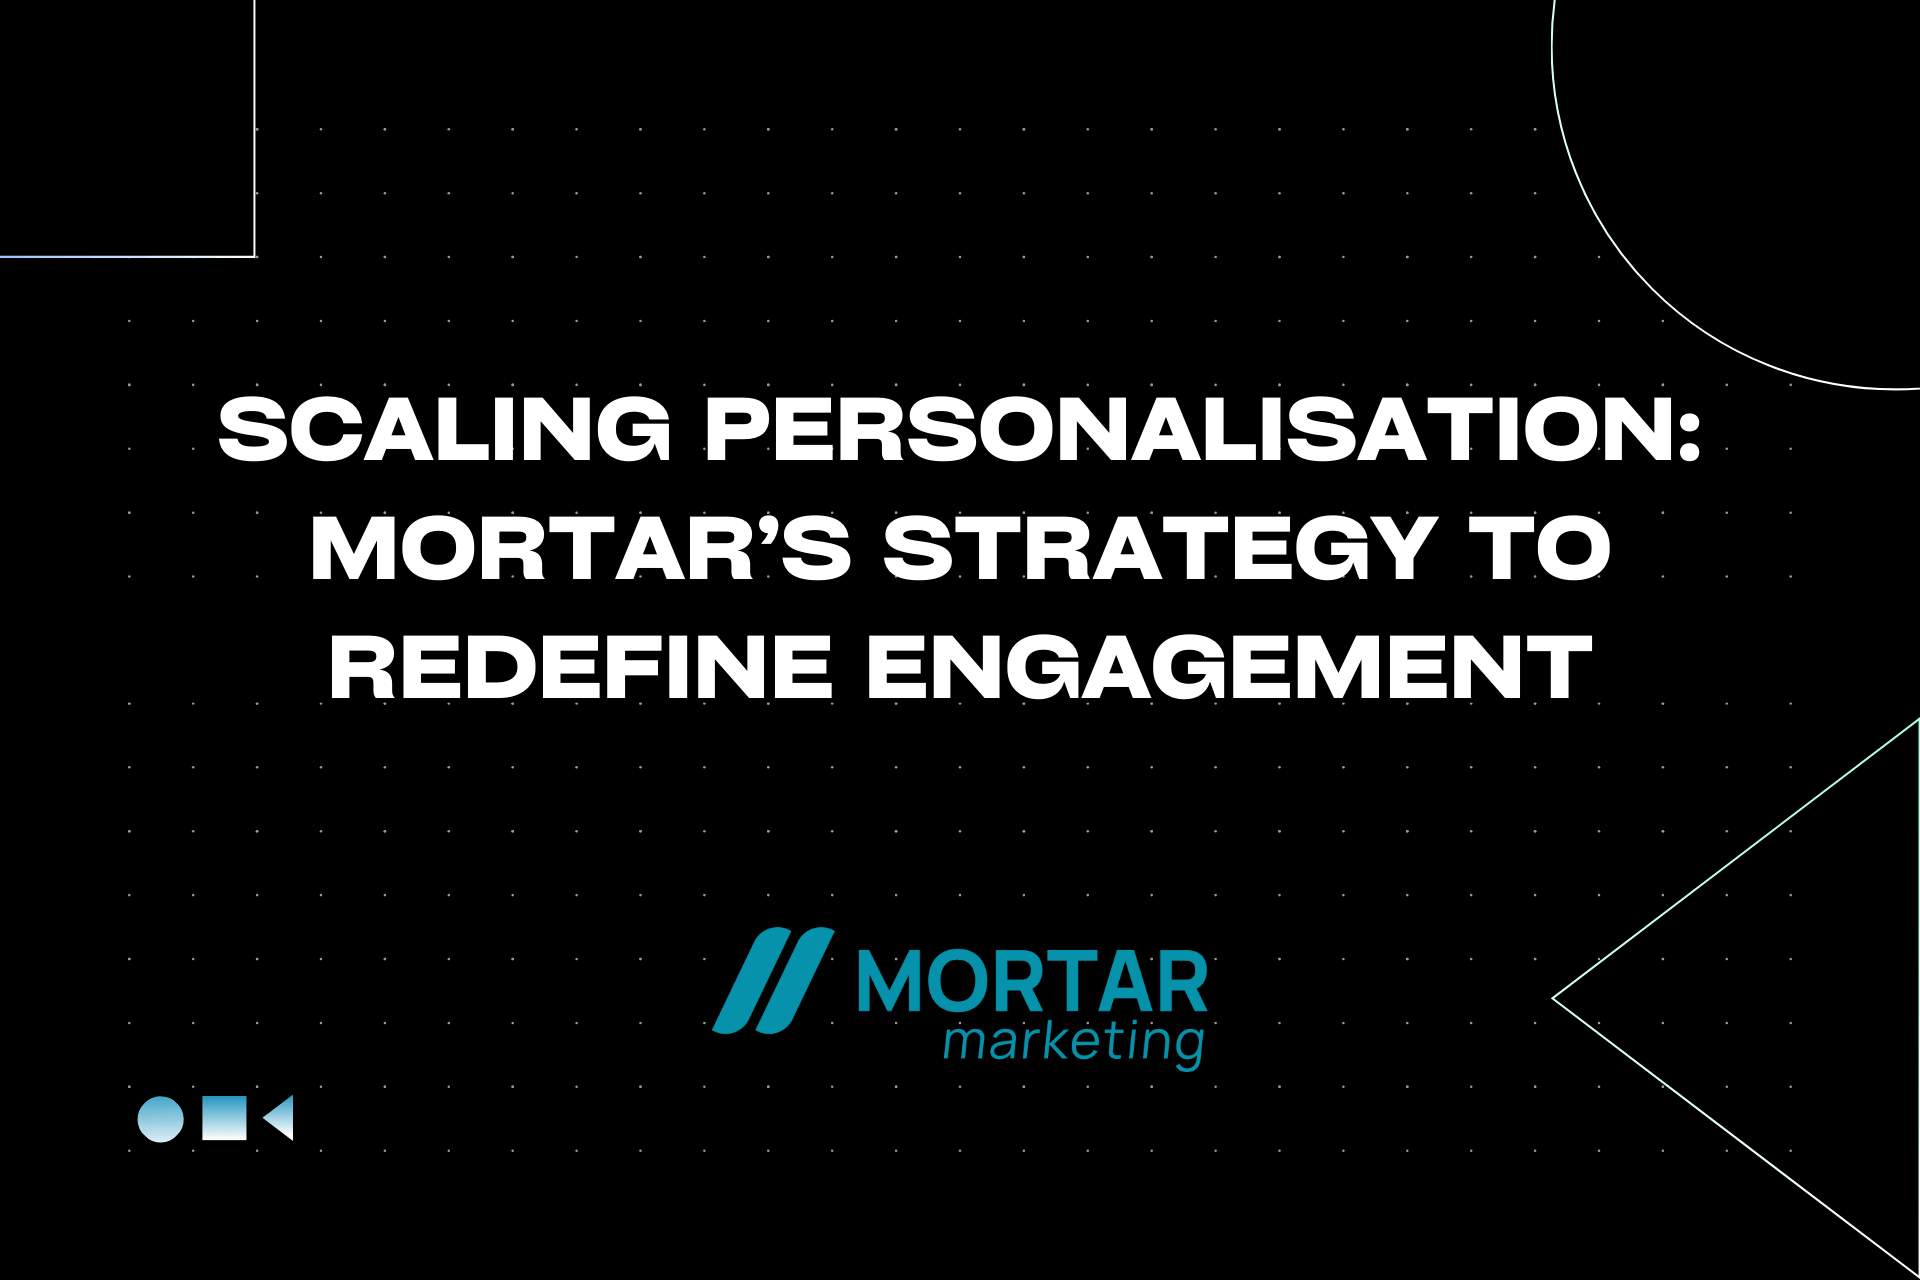 Scaling Personalisation: Mortar’s Strategy to Redefine Engagement